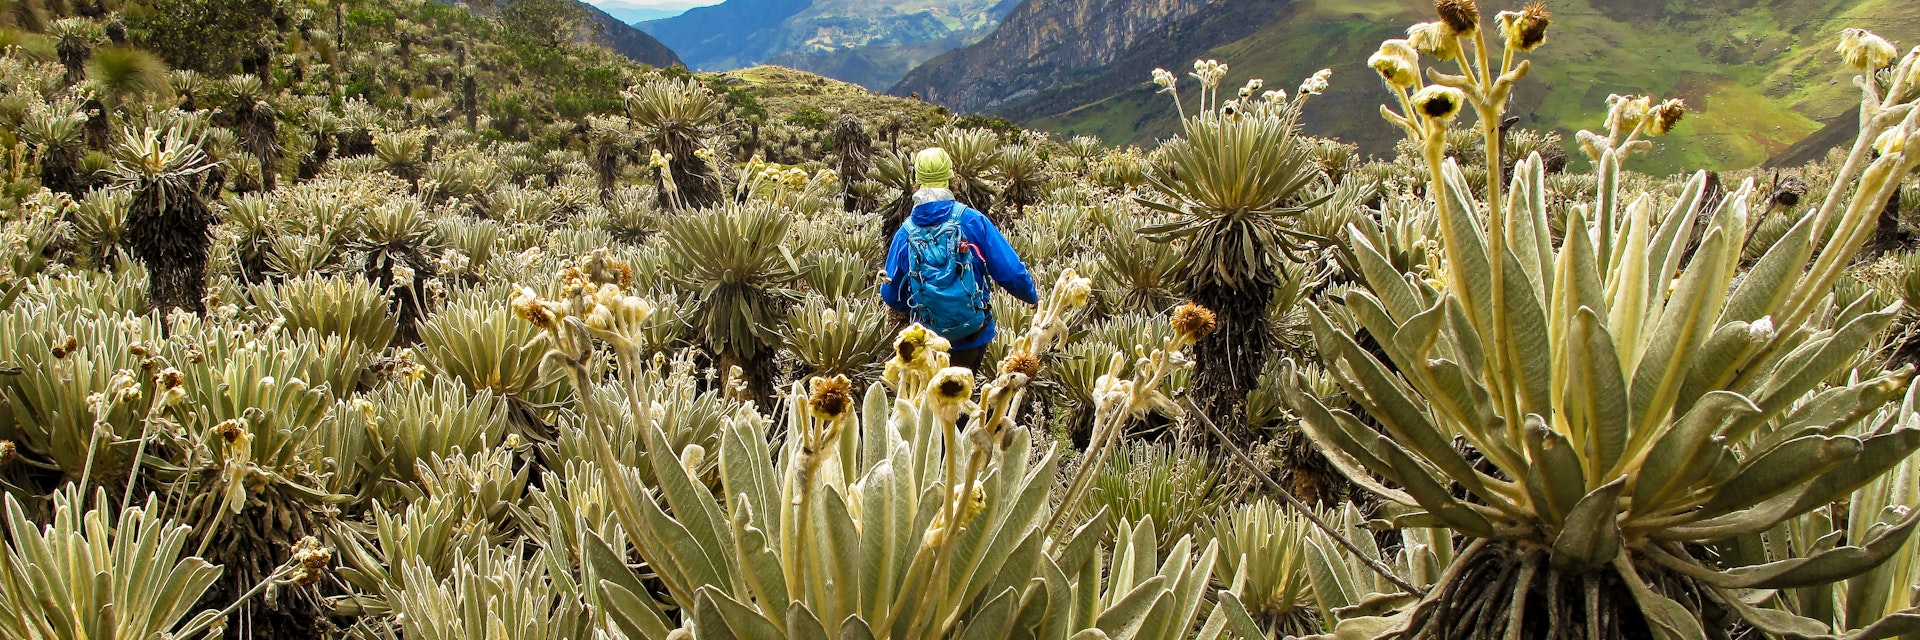 755448127
hiking, hiker, man, male, woman, colombia, espeletia, frailejones, frailejon, paramo, cocuy, andes, nature, mountains, travel, flora, people, person, female, landscape, america, fraylejon, el, outdoor, south, southamerica, green, ecosystem, environment, high, park, altitude, andean, ecuador, grass, plant, reserve, tourism, boyaca, clouds, mountain, national, latin, sky, awesome, trekking, backpacker, adventure, activity
Hiker in Colombian paramo highland of Cocuy National Park, surrounded by the beautiful Frailejones plants.